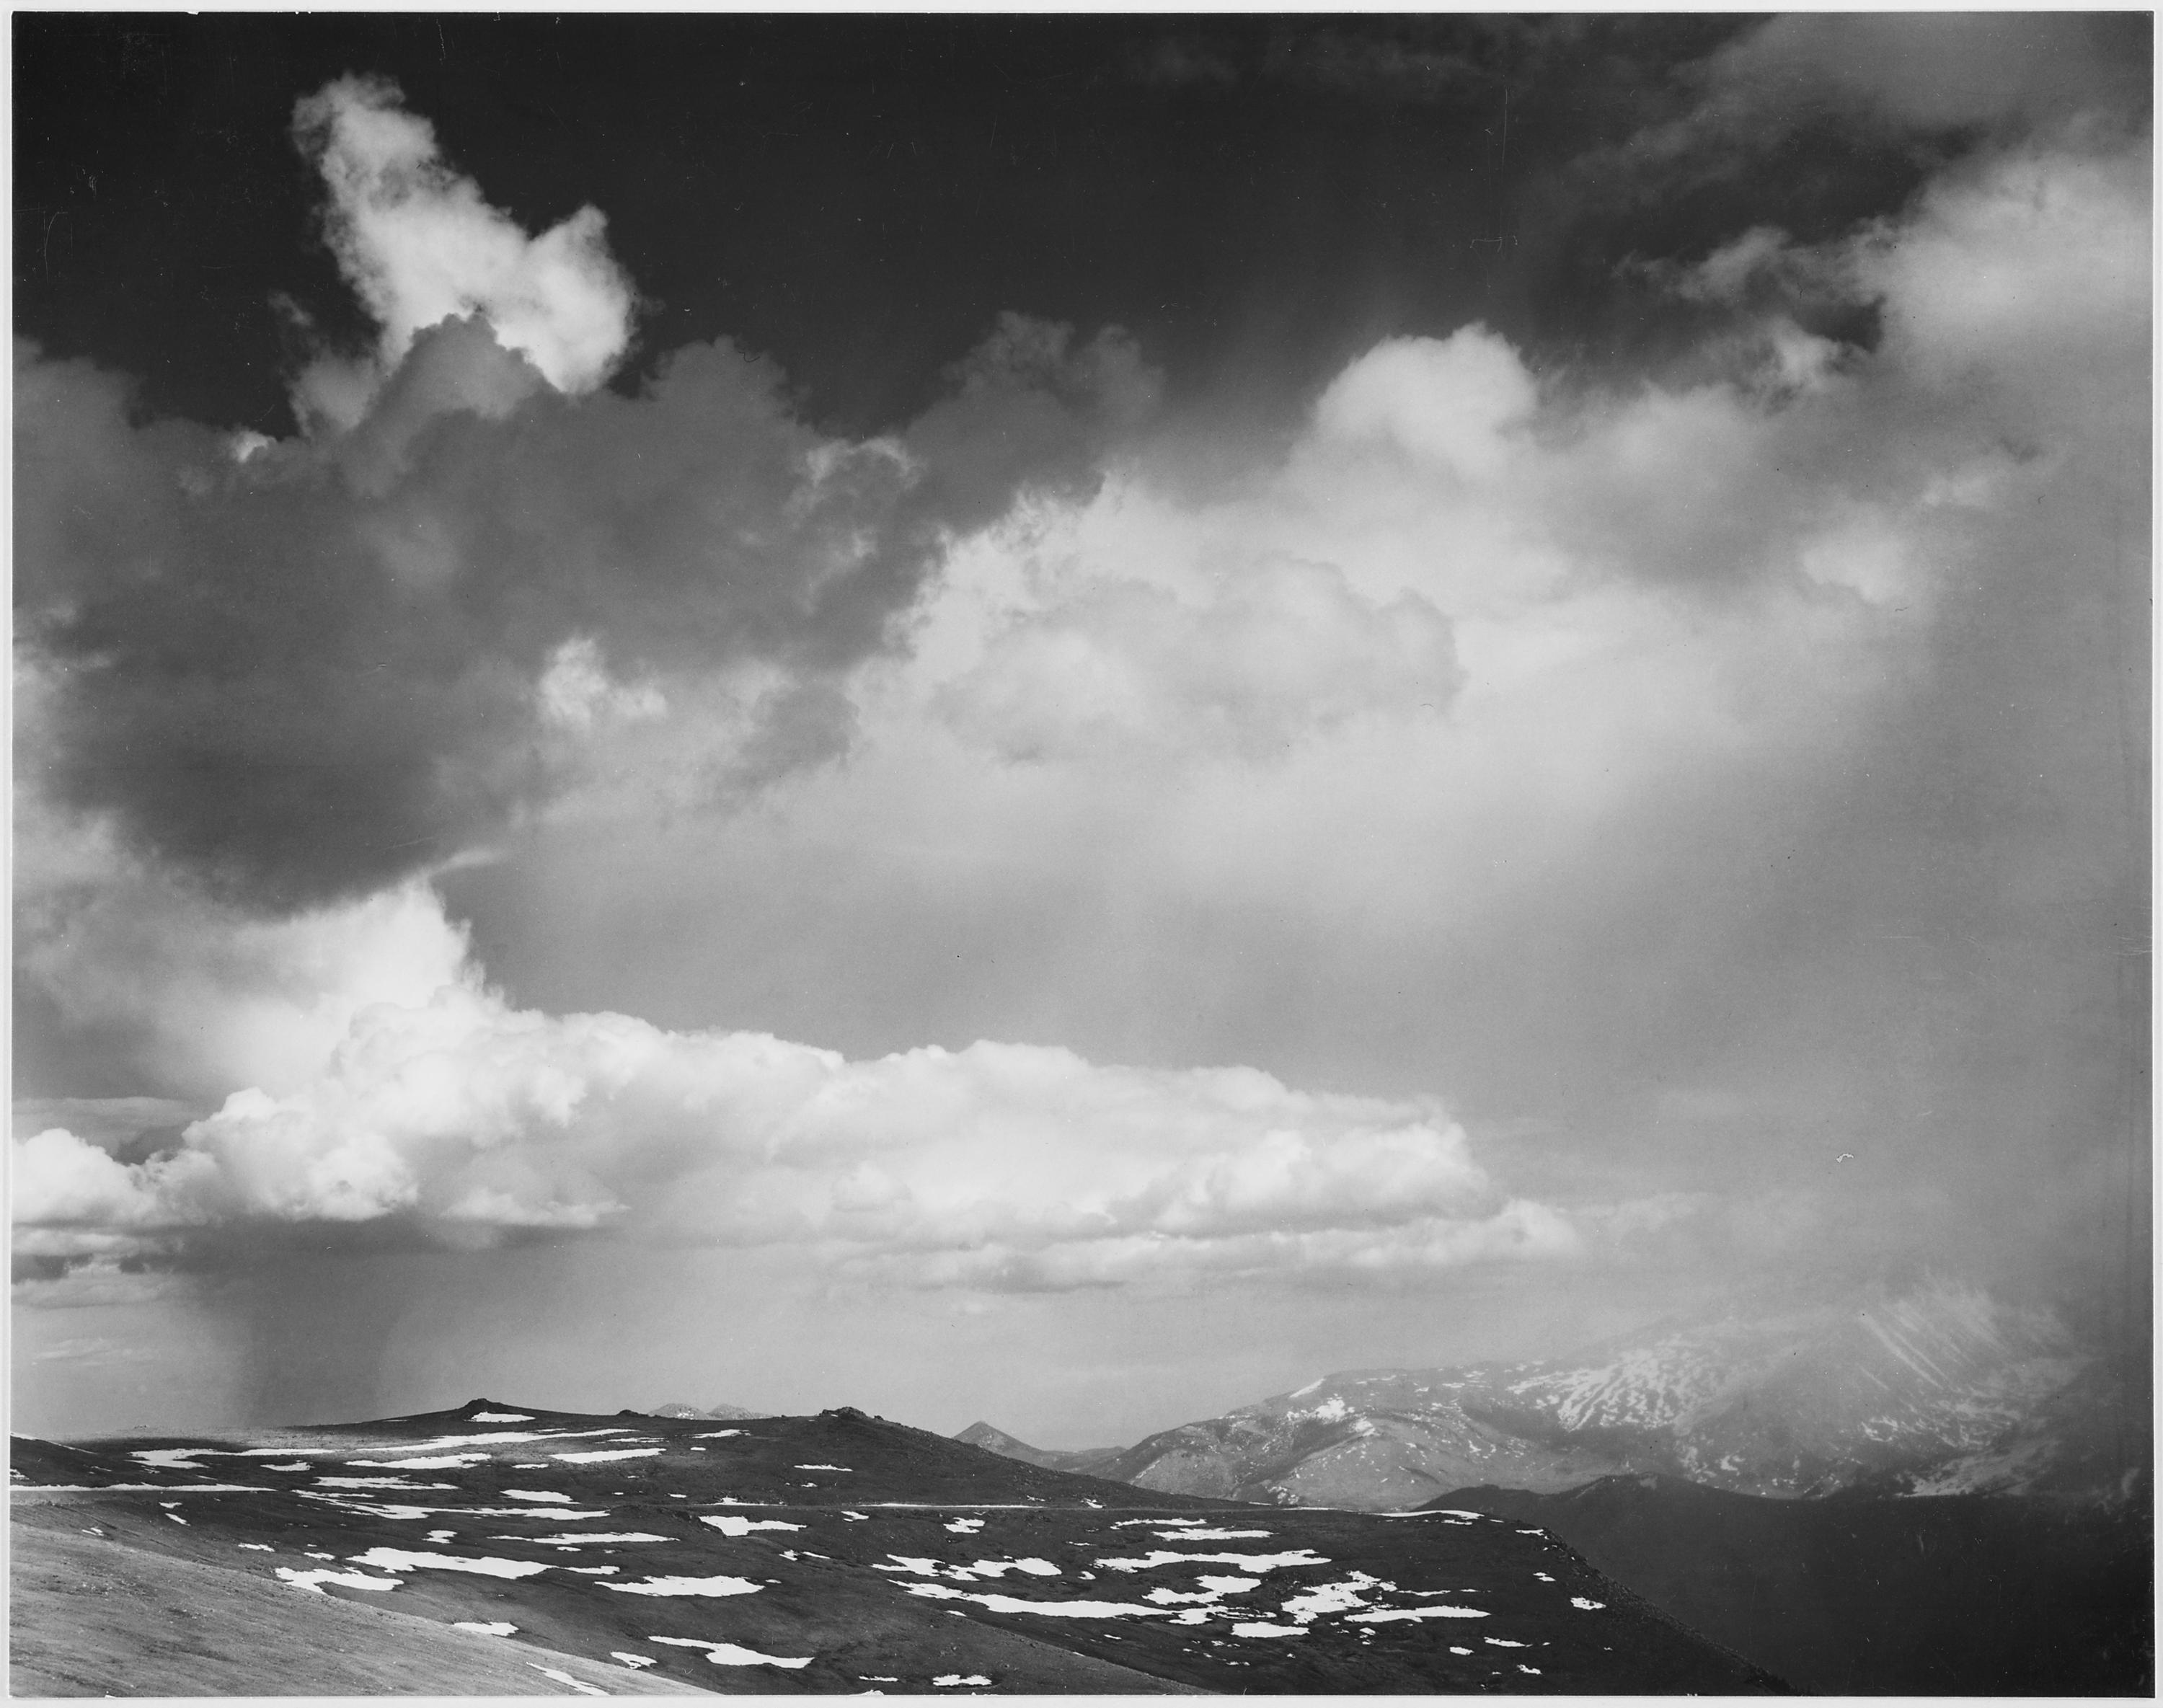 Ansel Adams - National Archives 79-AA-M04